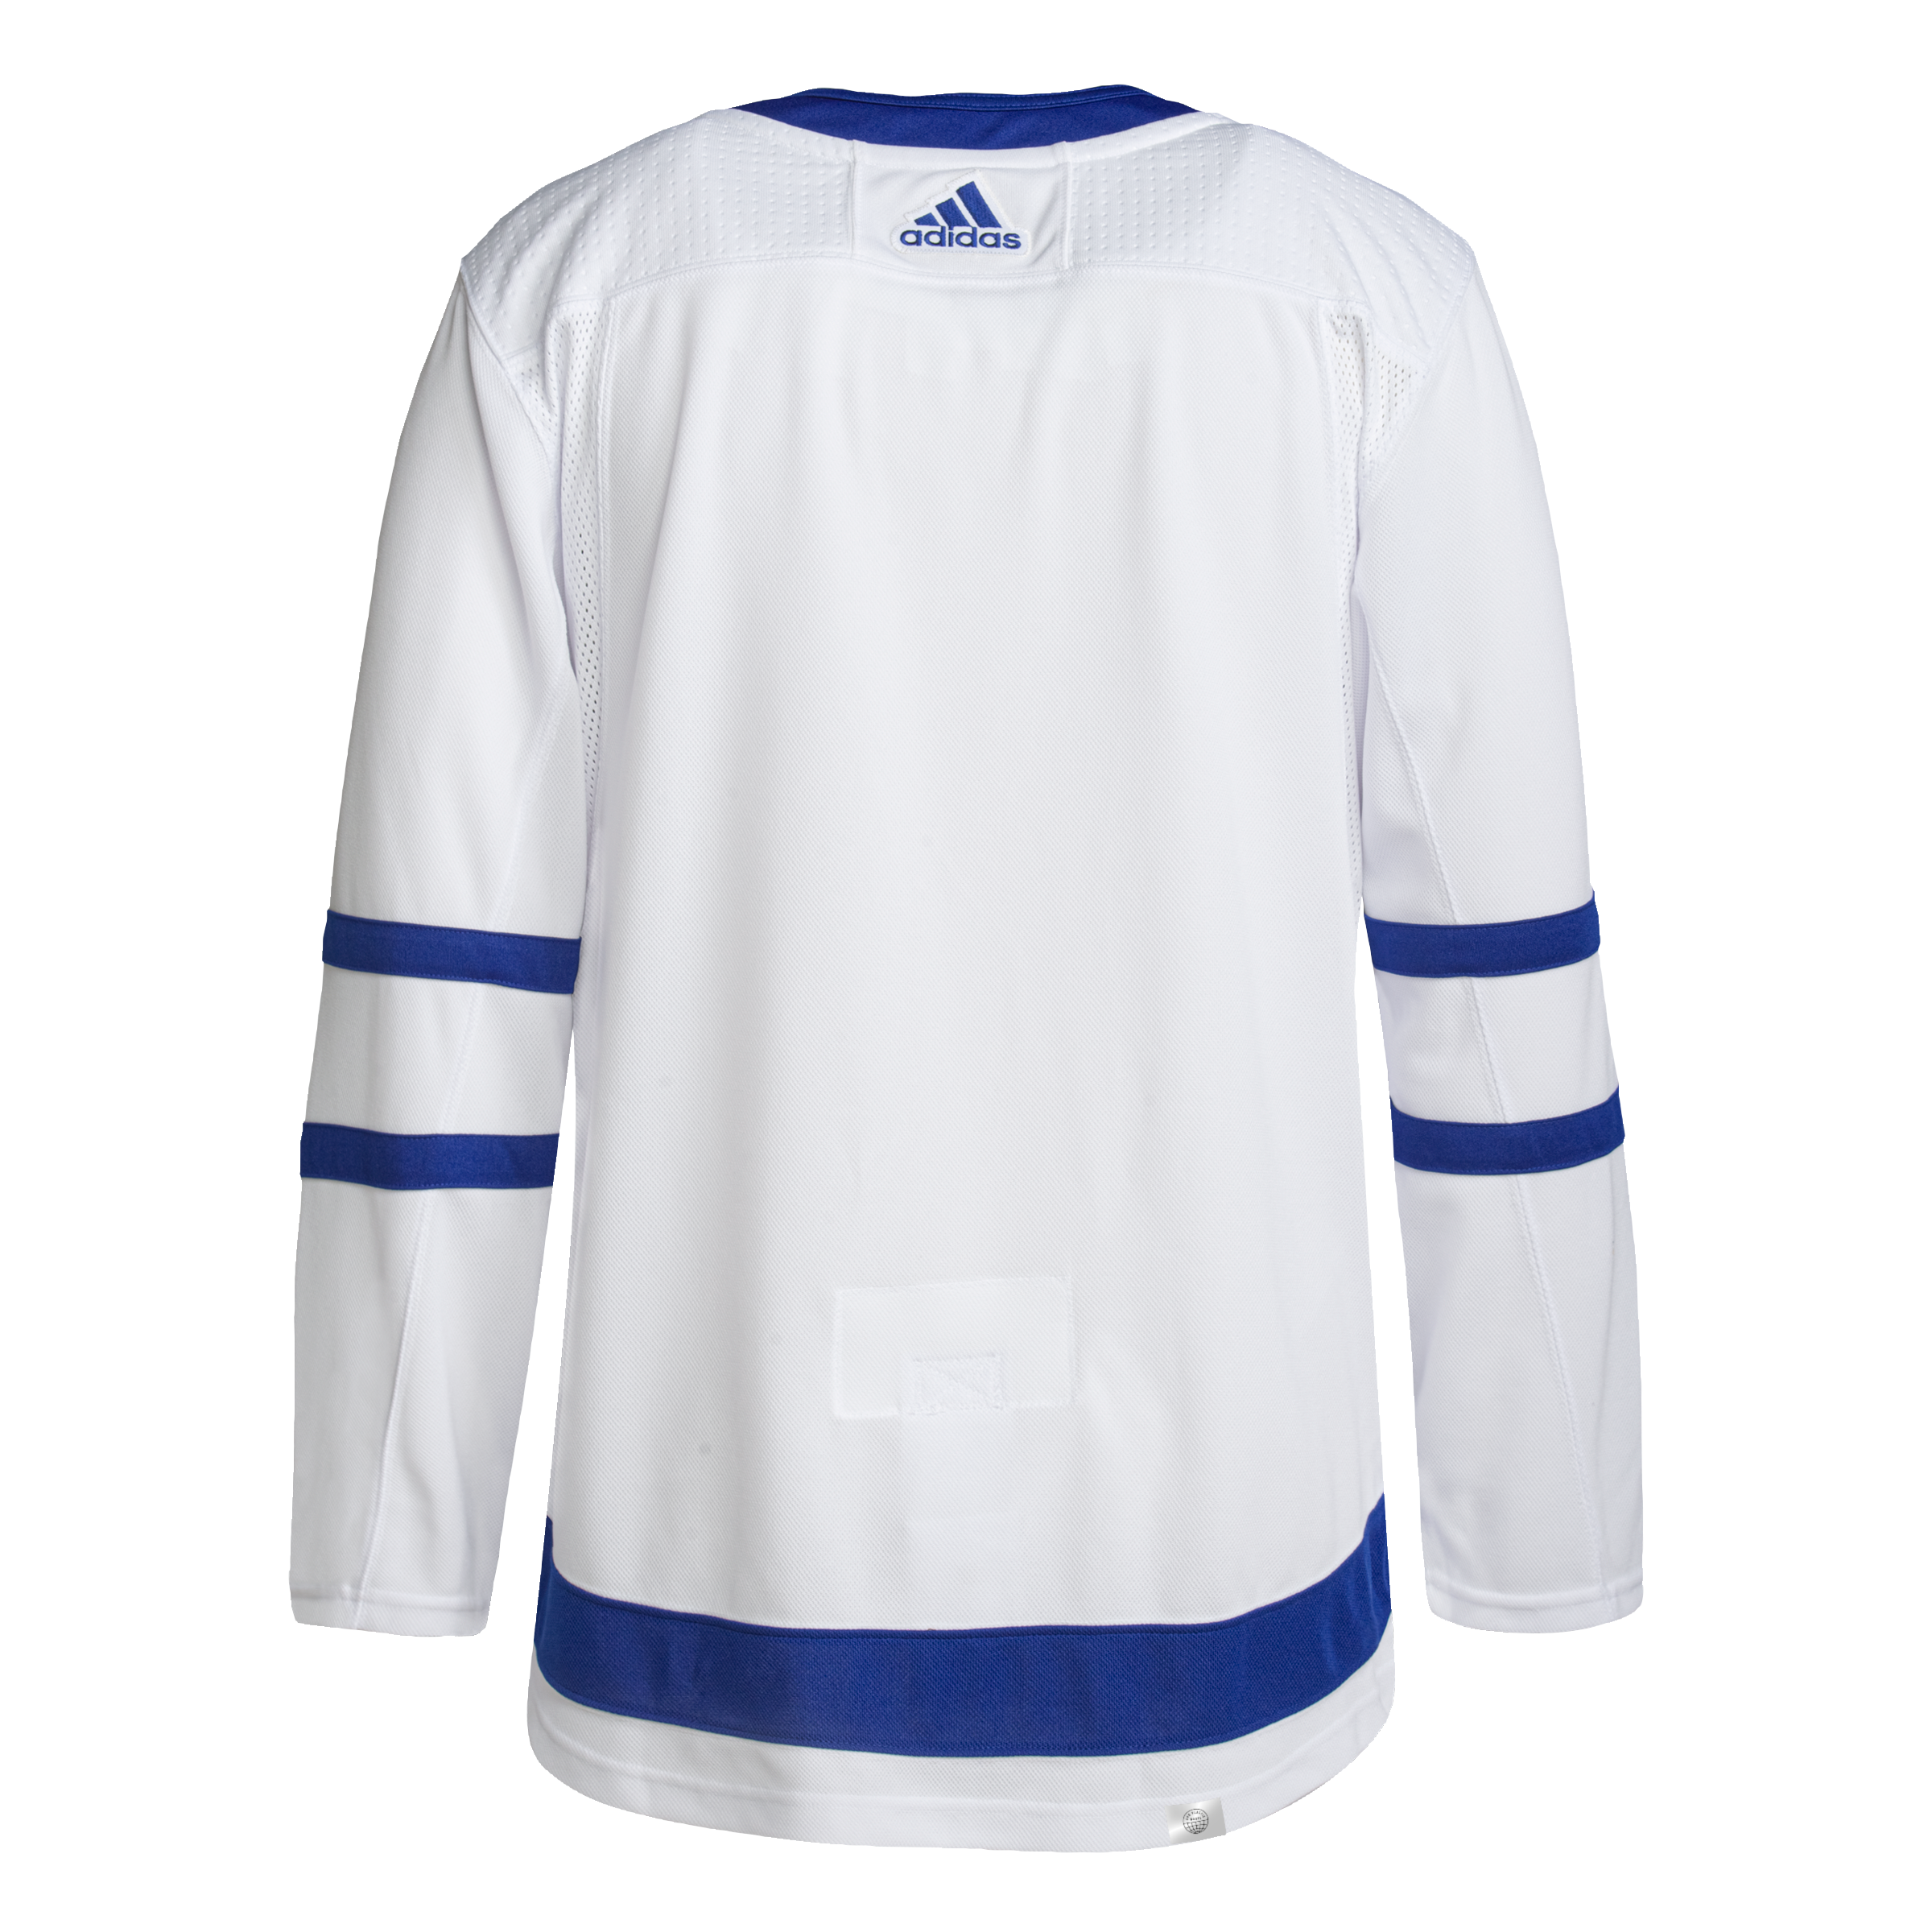 Sold at Auction: Blank Toronto Maple Leafs Authentic NHL Adidas